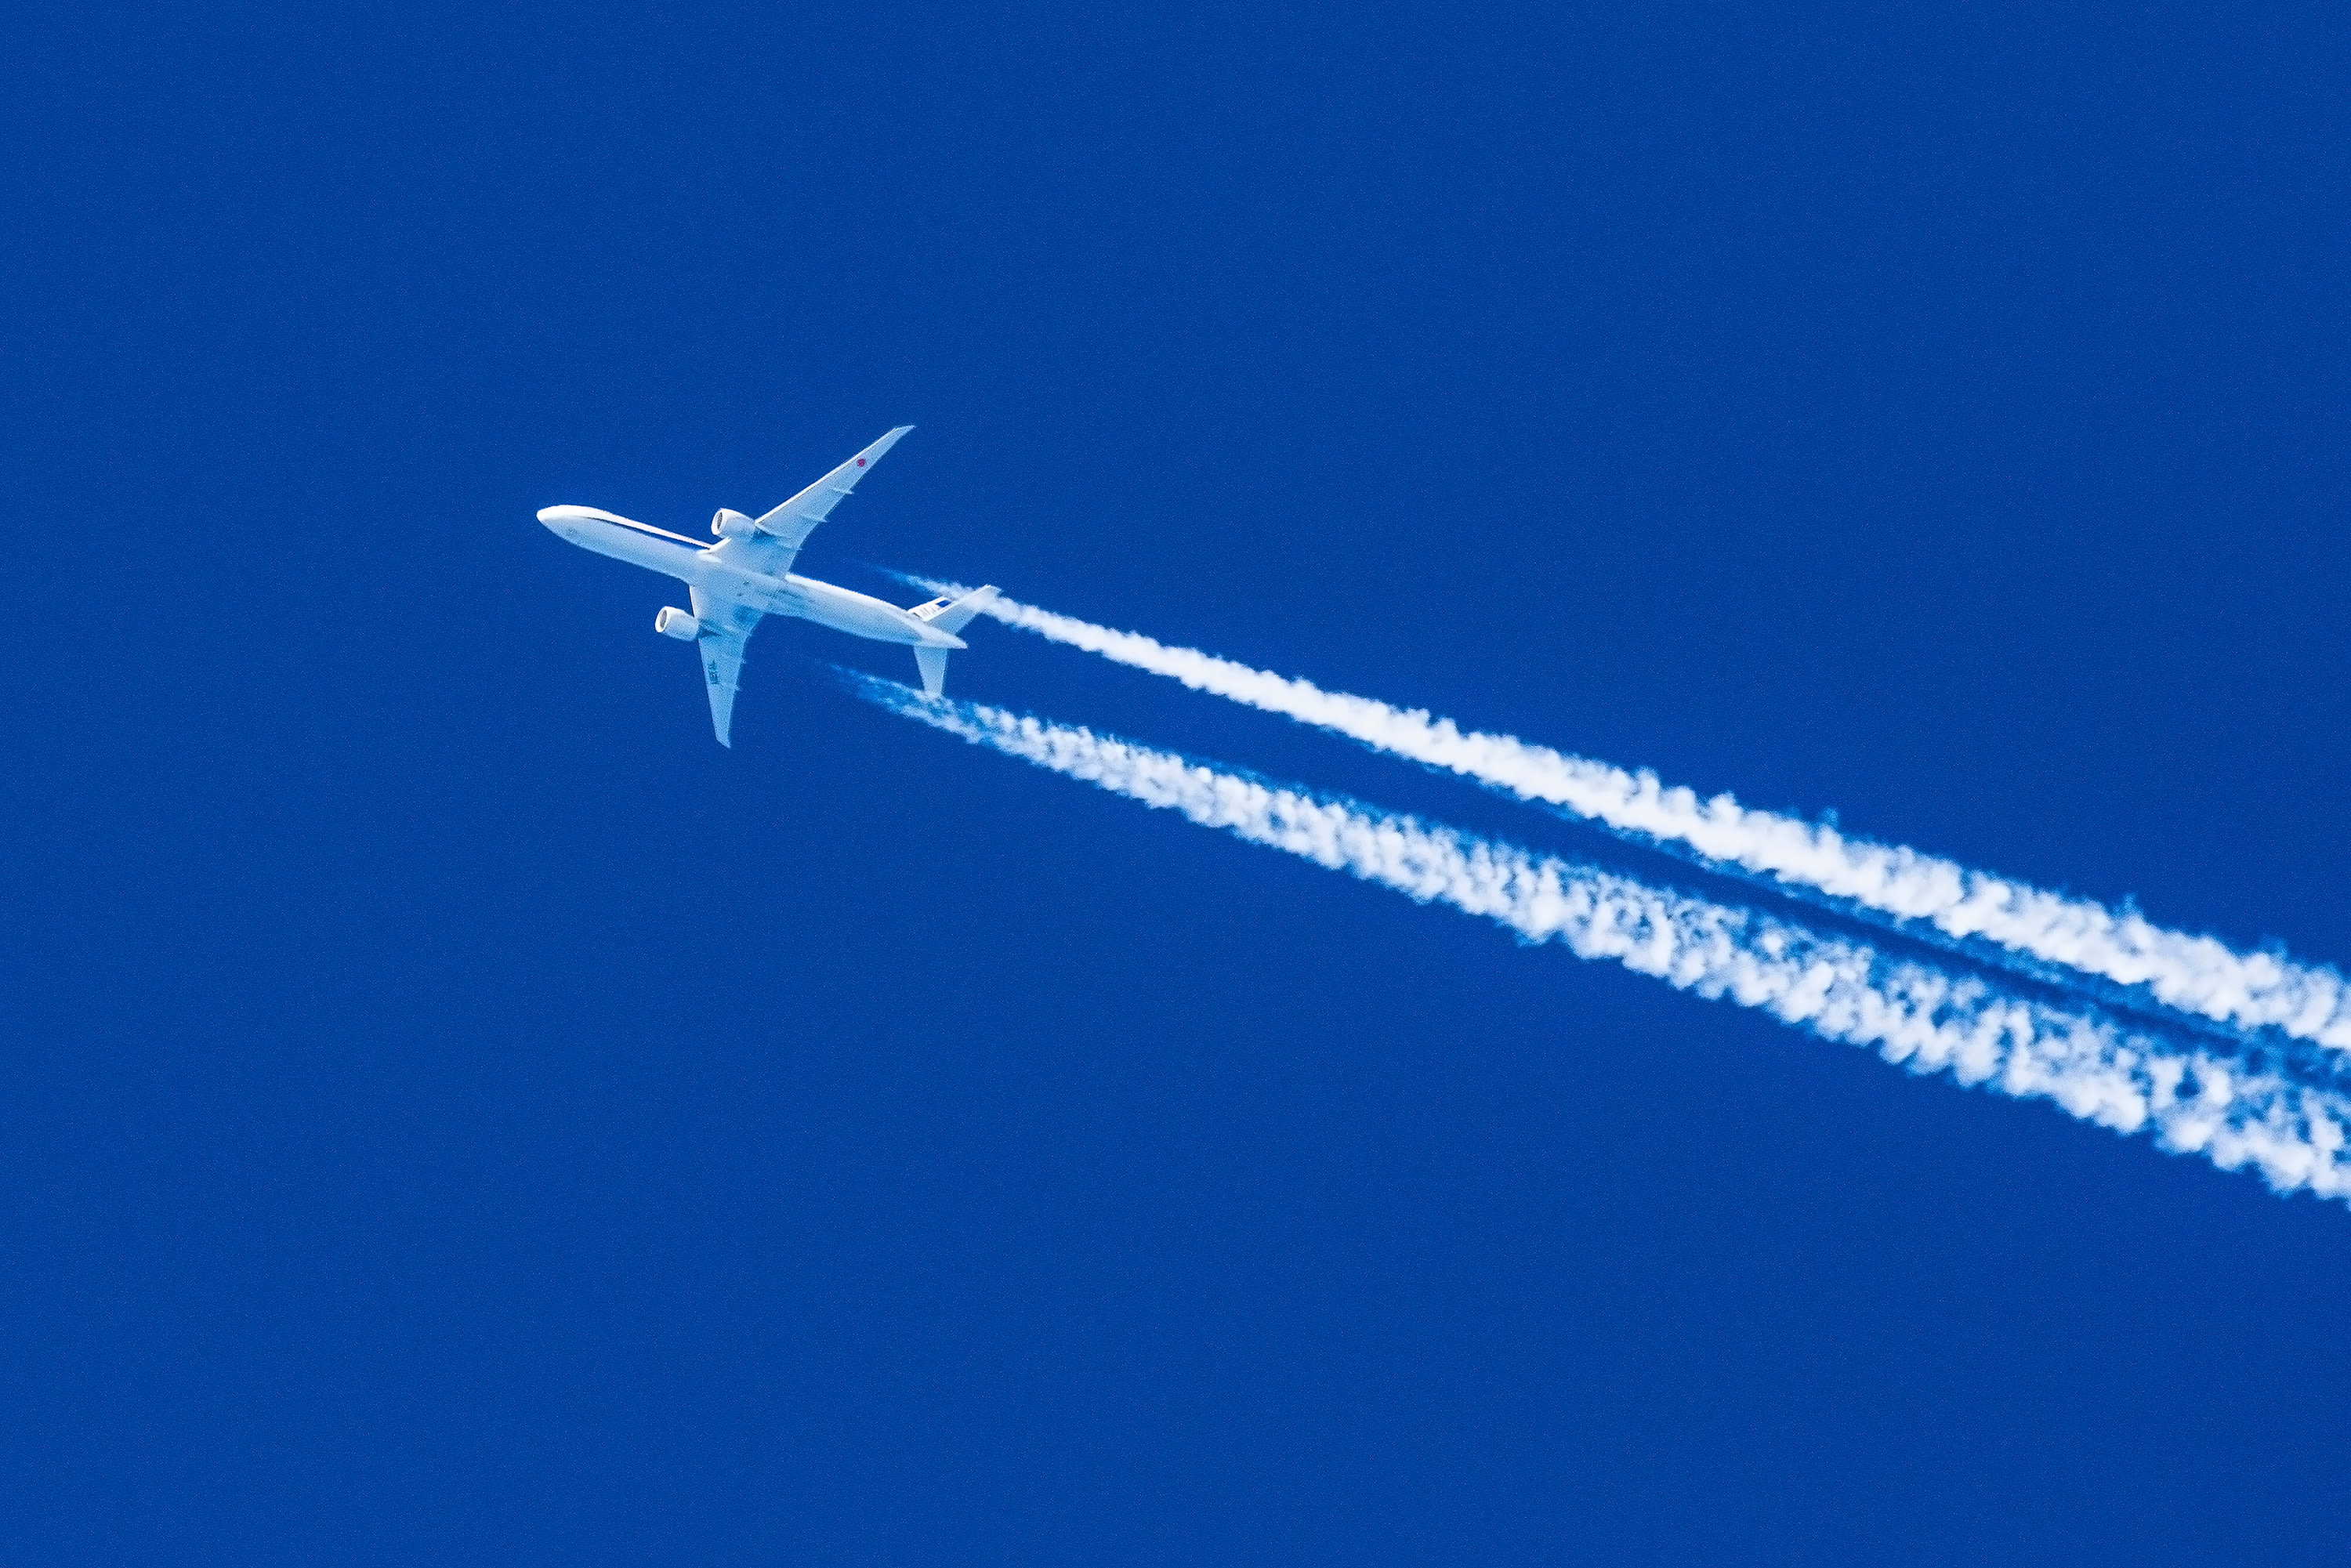 An aircraft flying in a blue sky with contrails coming out the back